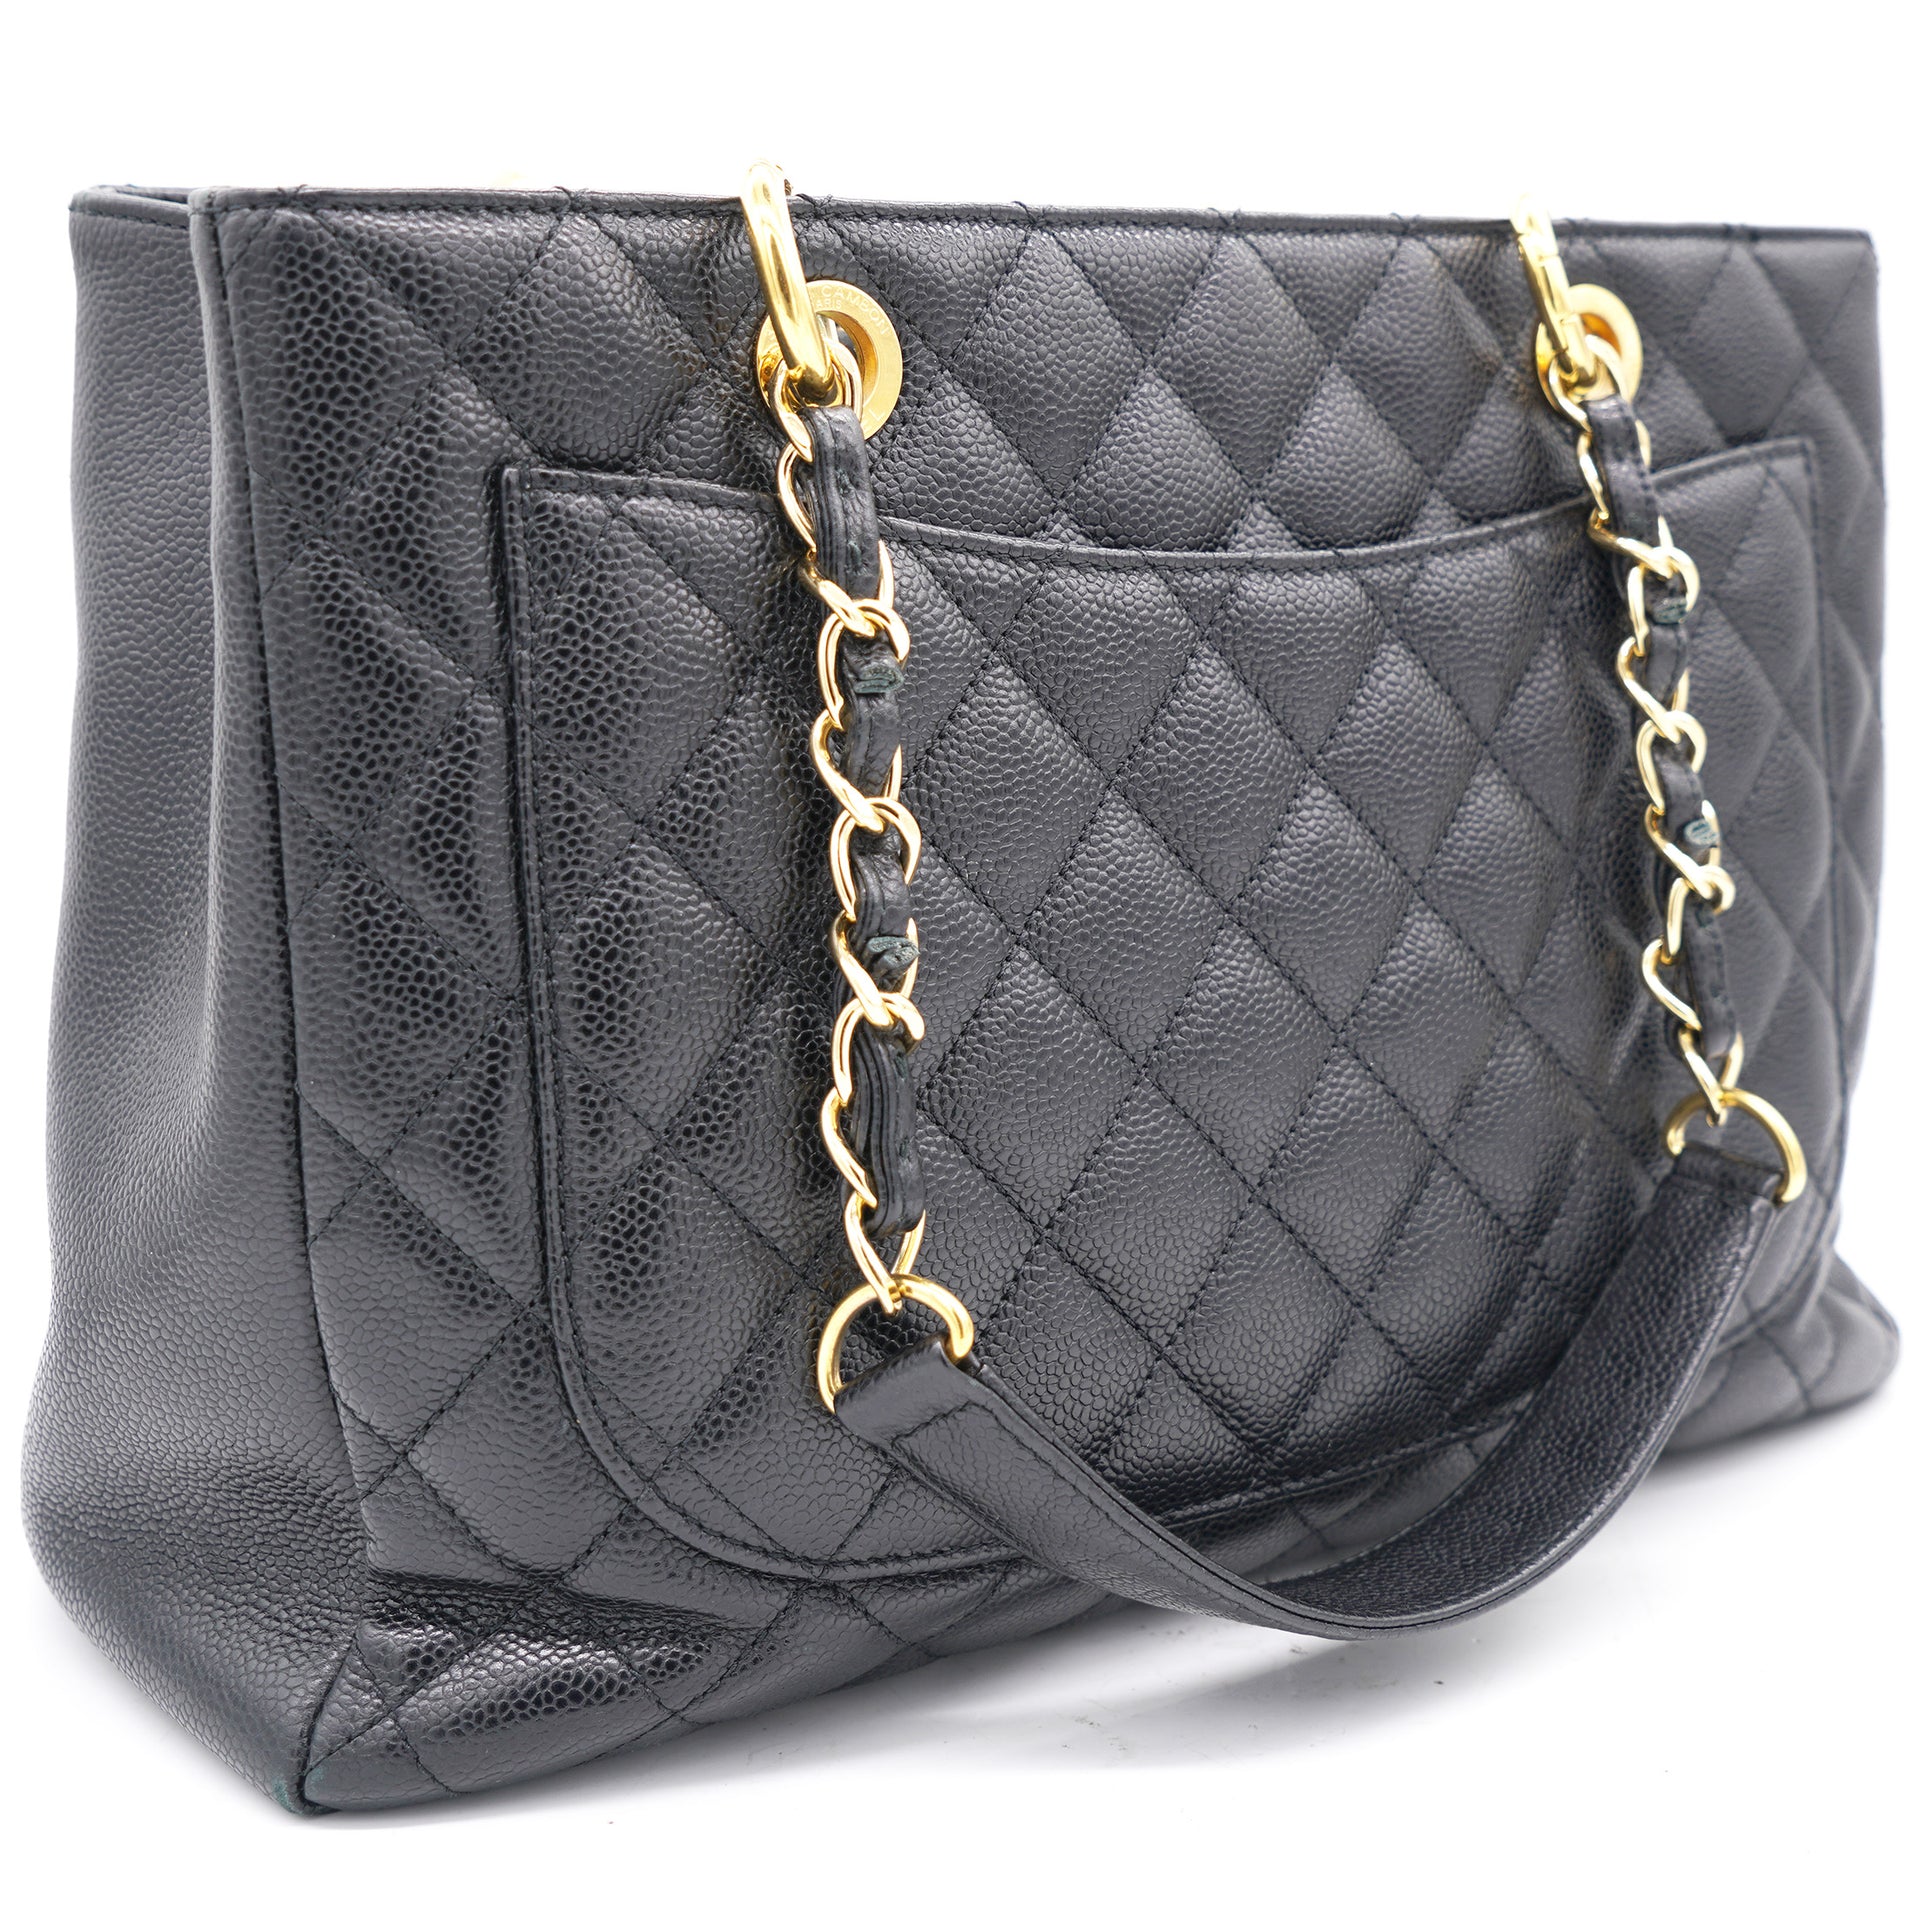 Black Quilted Caviar Leather Grand Shopper Tote